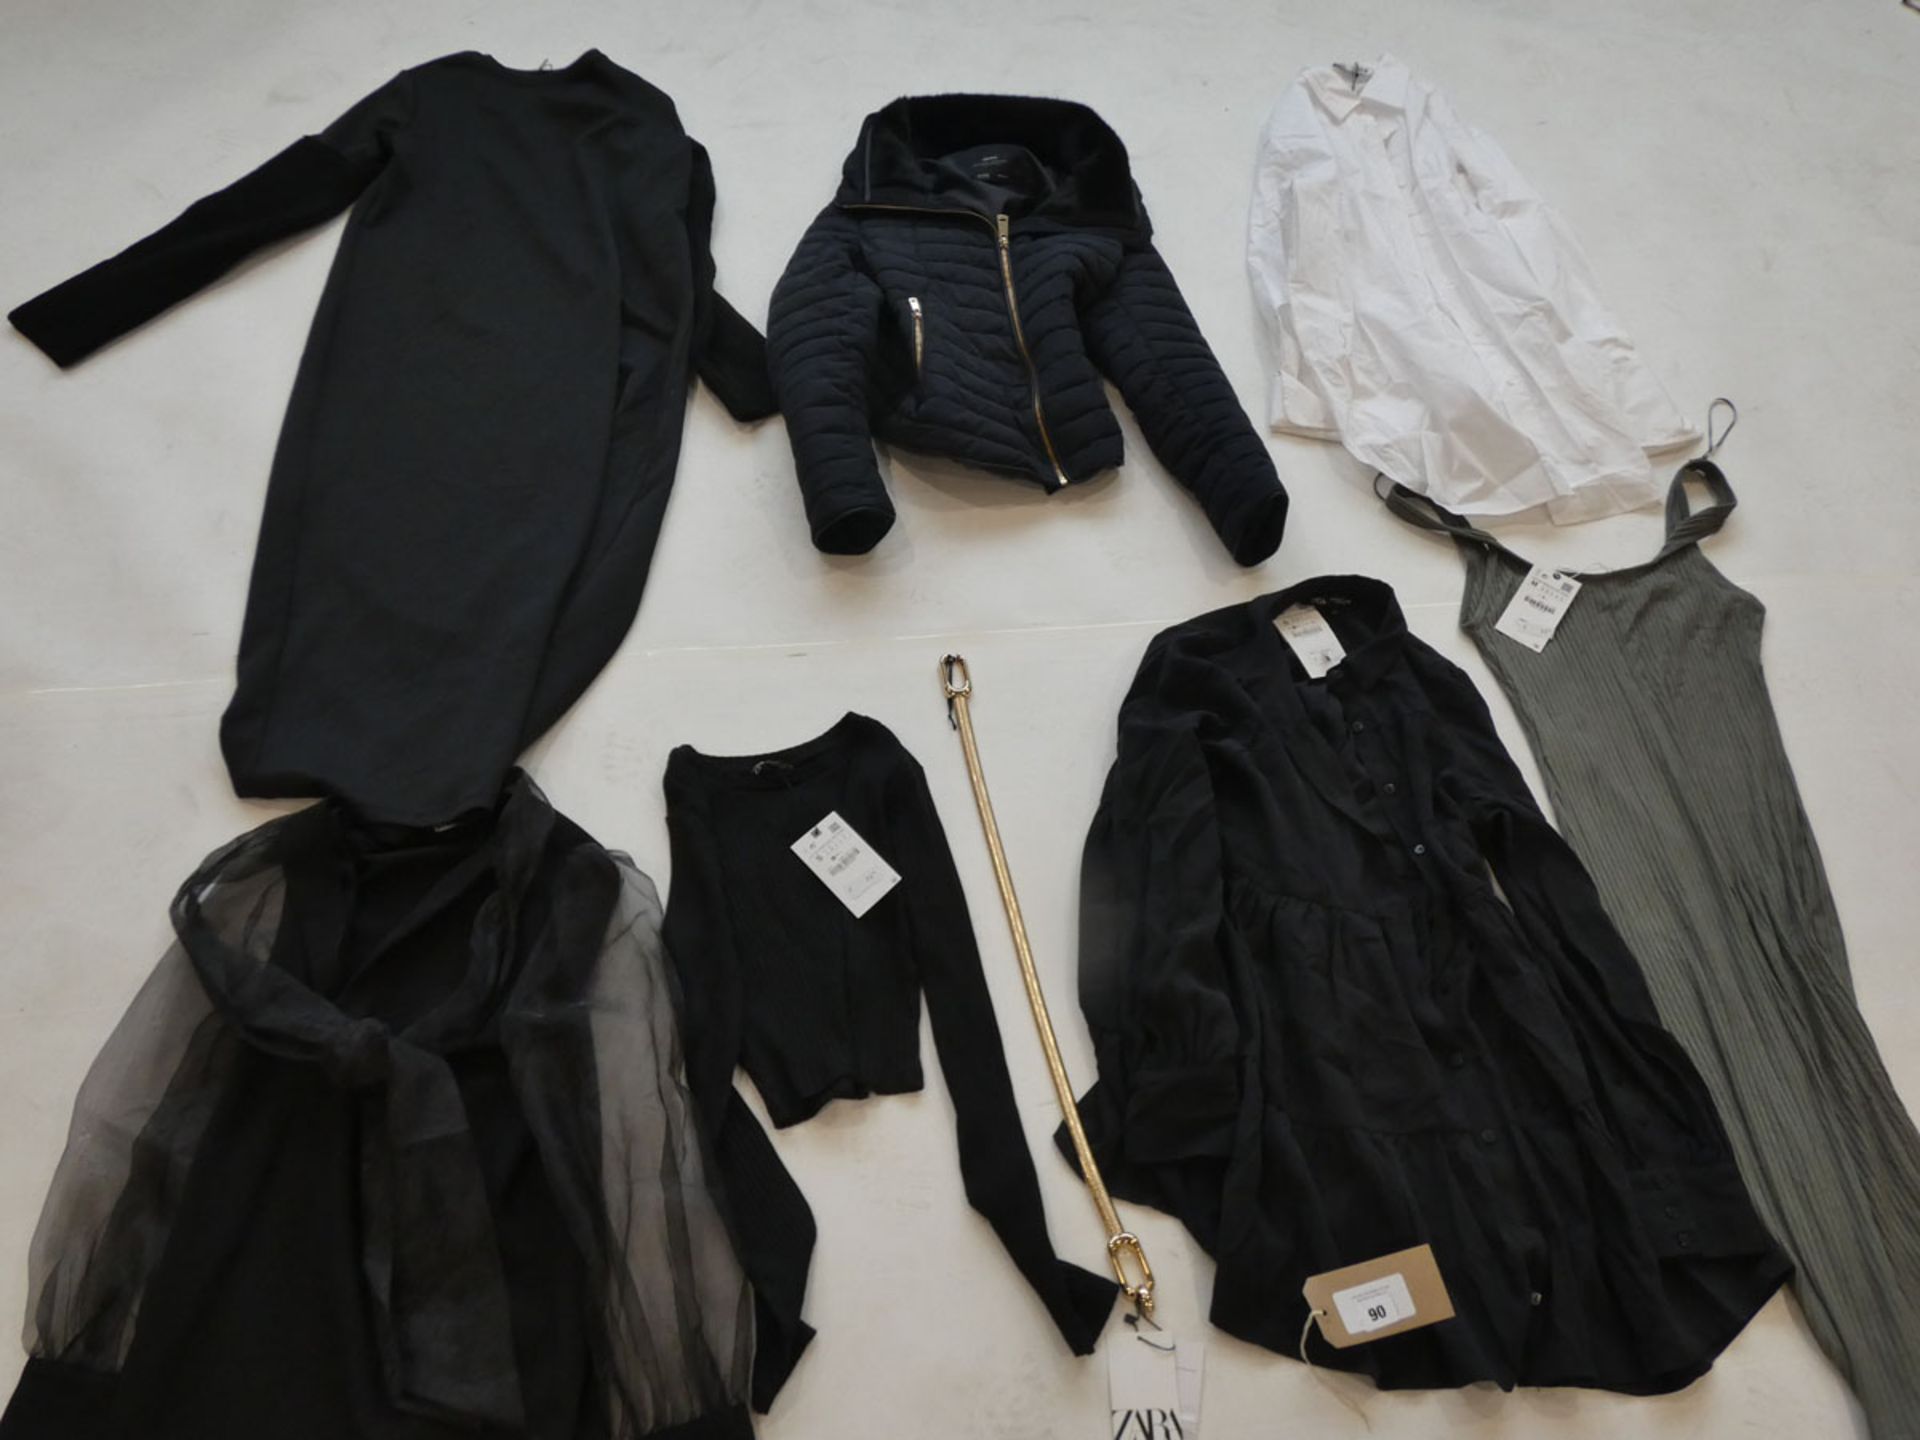 Selection of Zara clothing to include dresses, jacket, tops, etc